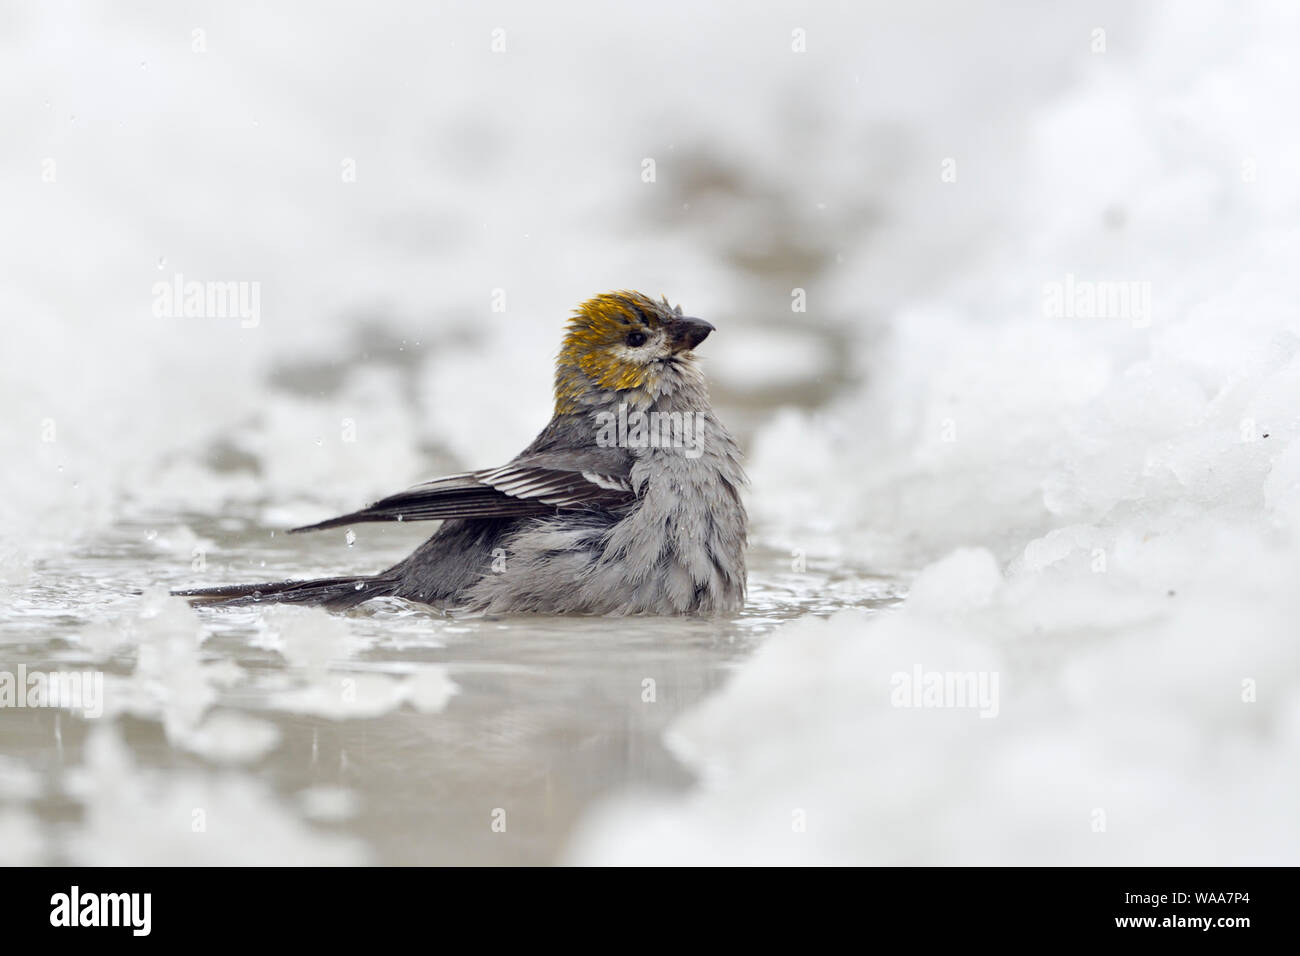 Pine grosbeak / Hakengimpel ( Pinicola enucleator ), female adult in winter, bathing, cleaning its plumage in an icy puddle, Montana, USA. Stock Photo